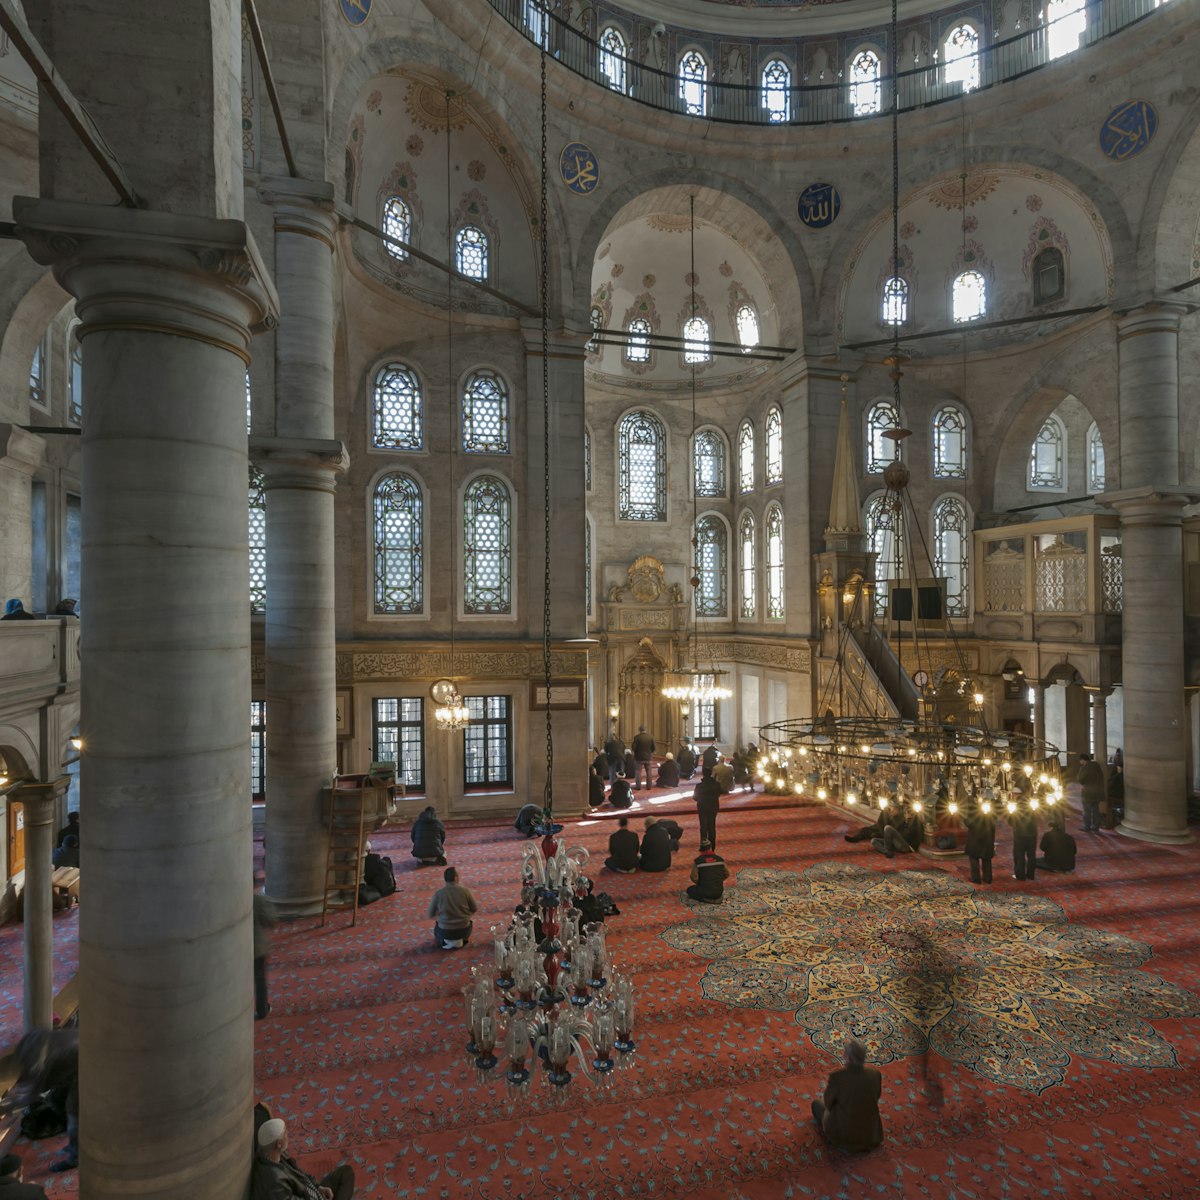 The Eyup Sultan Mosque in Istanbul